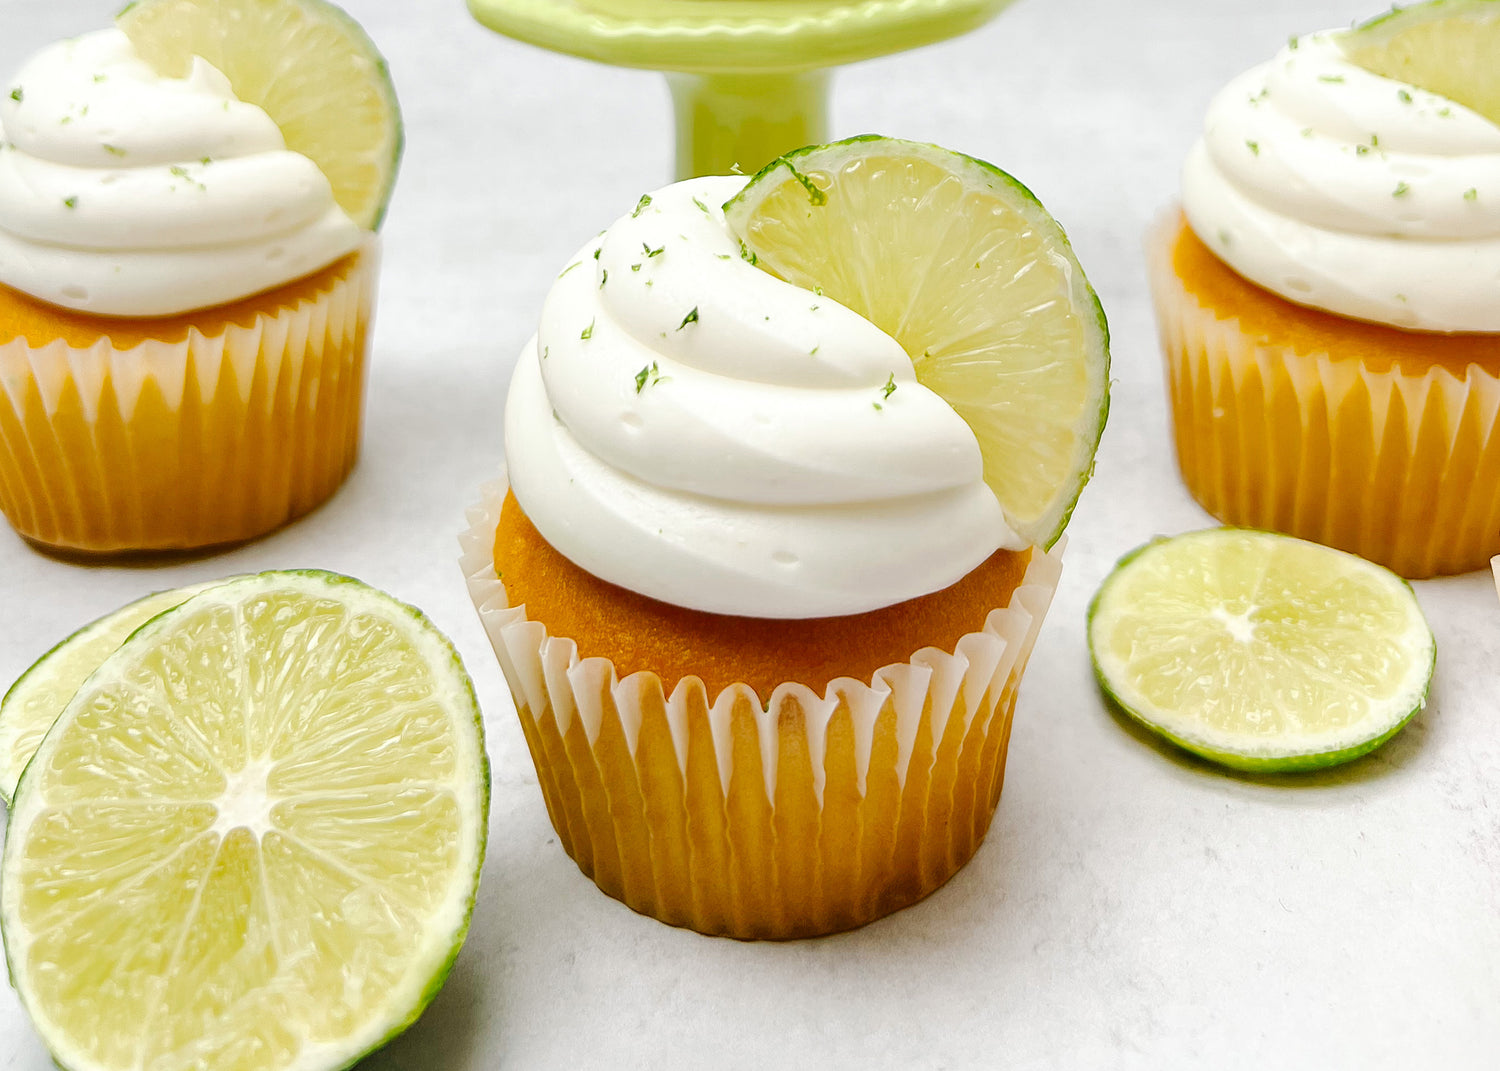 Ready To Use Premium Buttercream Frosting - (LIME FLAVOR)Edible